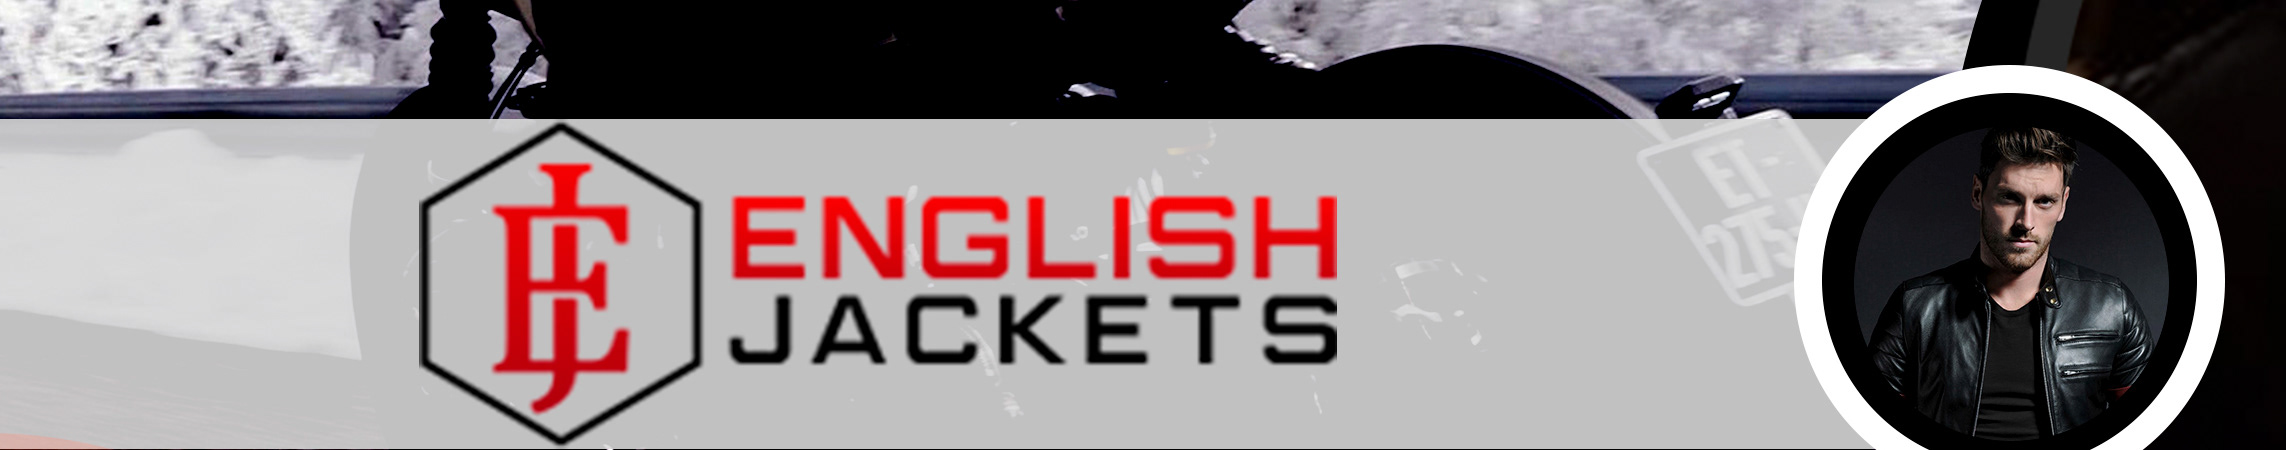 English Jackets's profile banner